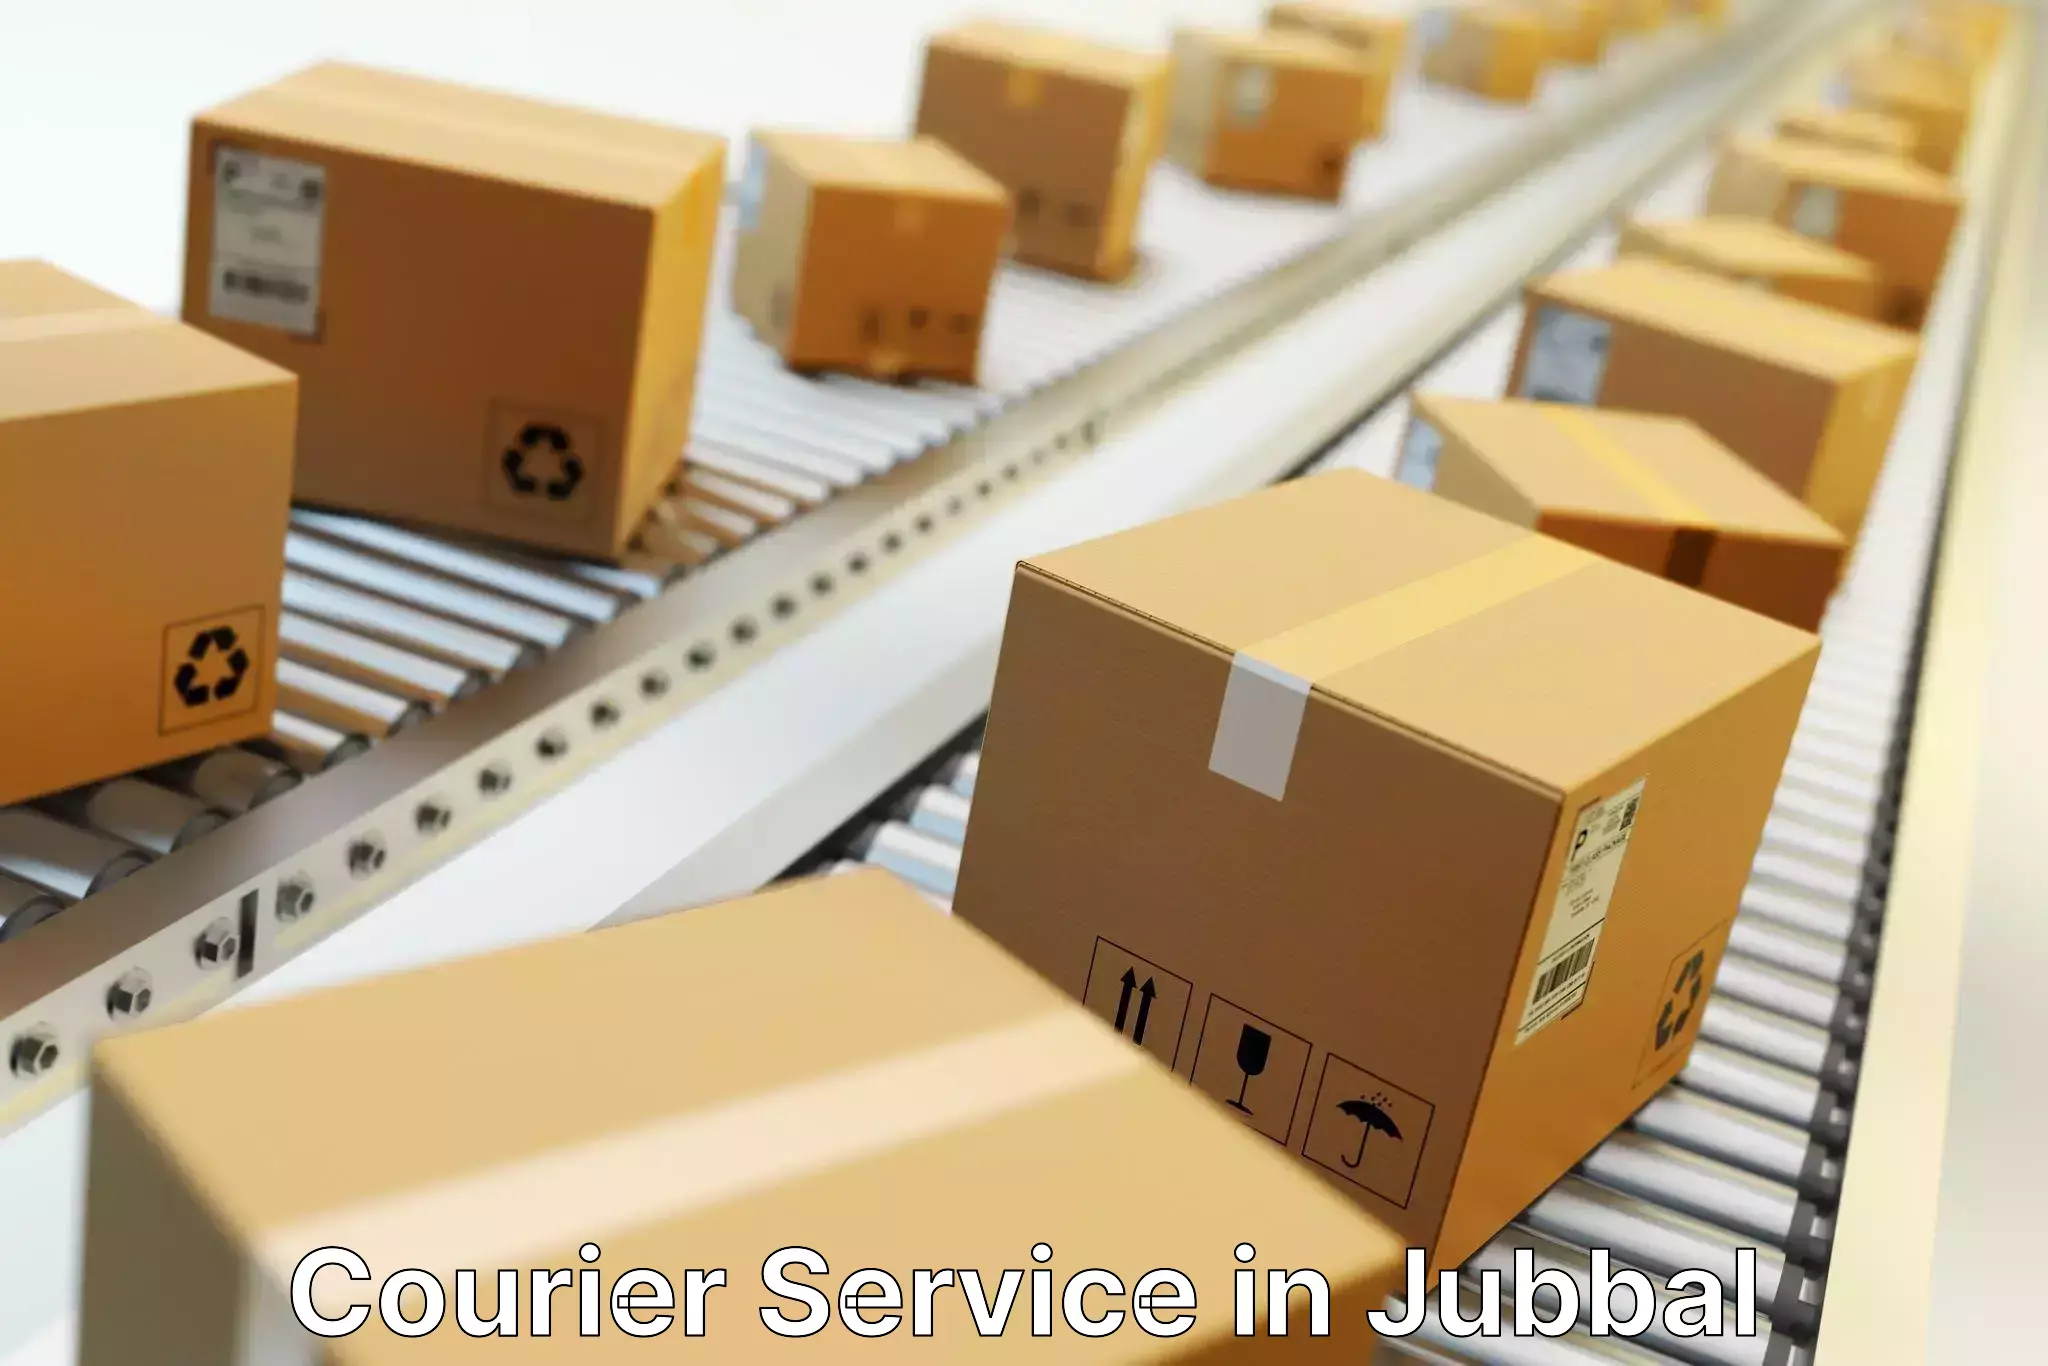 Courier service partnerships in Jubbal